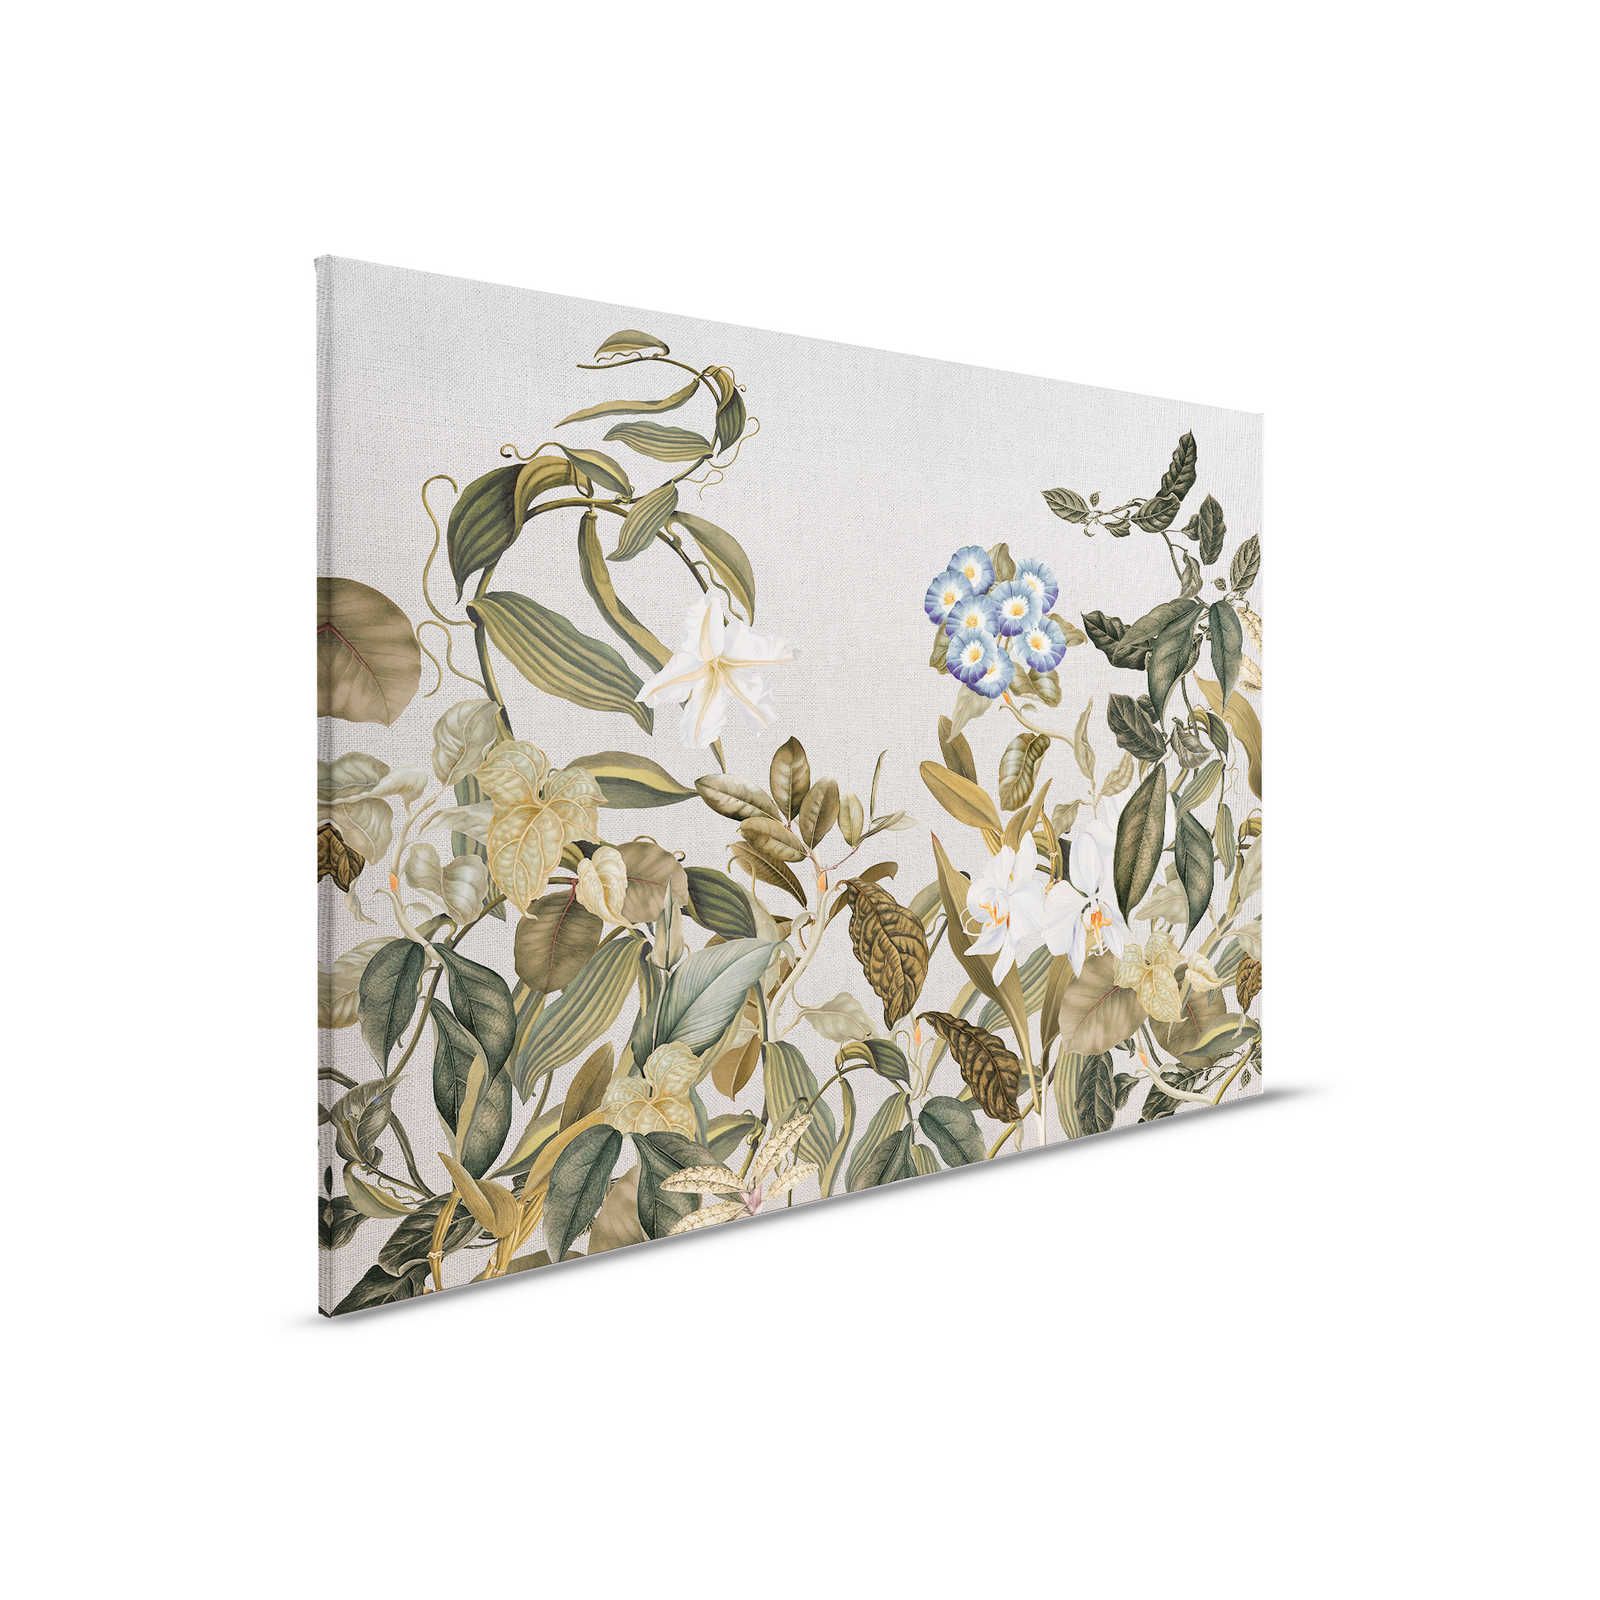 Canvas painting Botanical Style Flowers, Leaves & Textile Look - 0.90 m x 0.60 m
